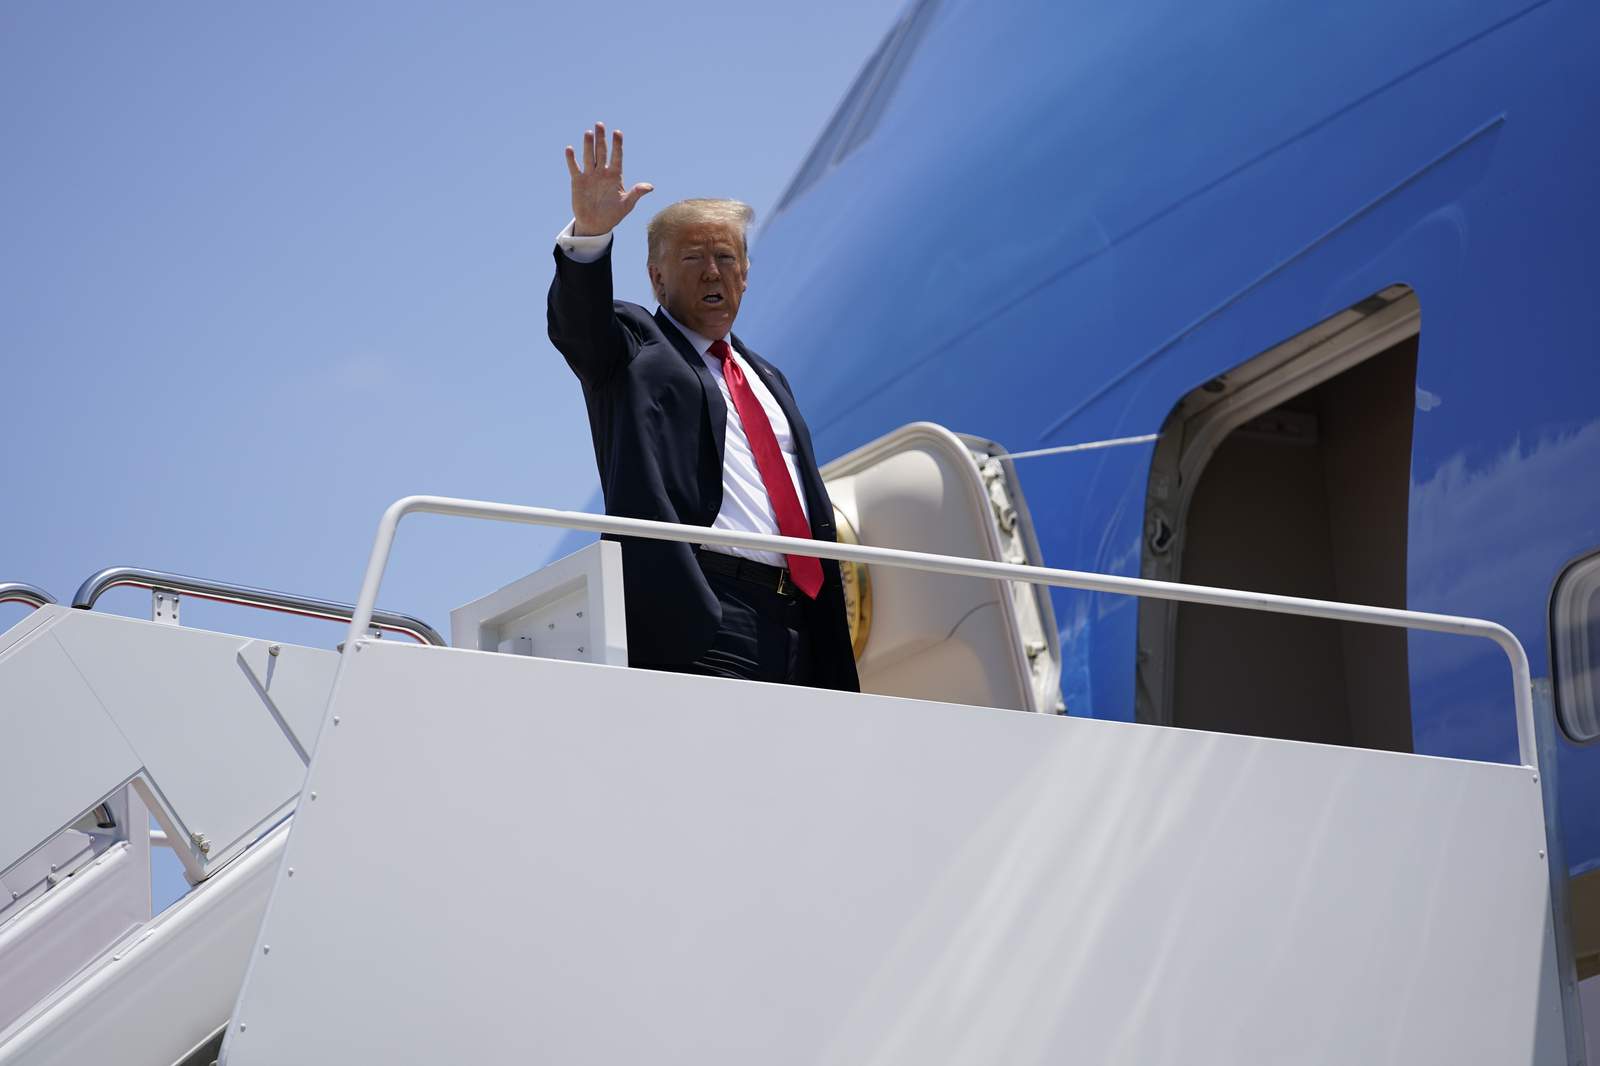 Watchdogs: Trump's Independence Day gala in 2019 cost $13M